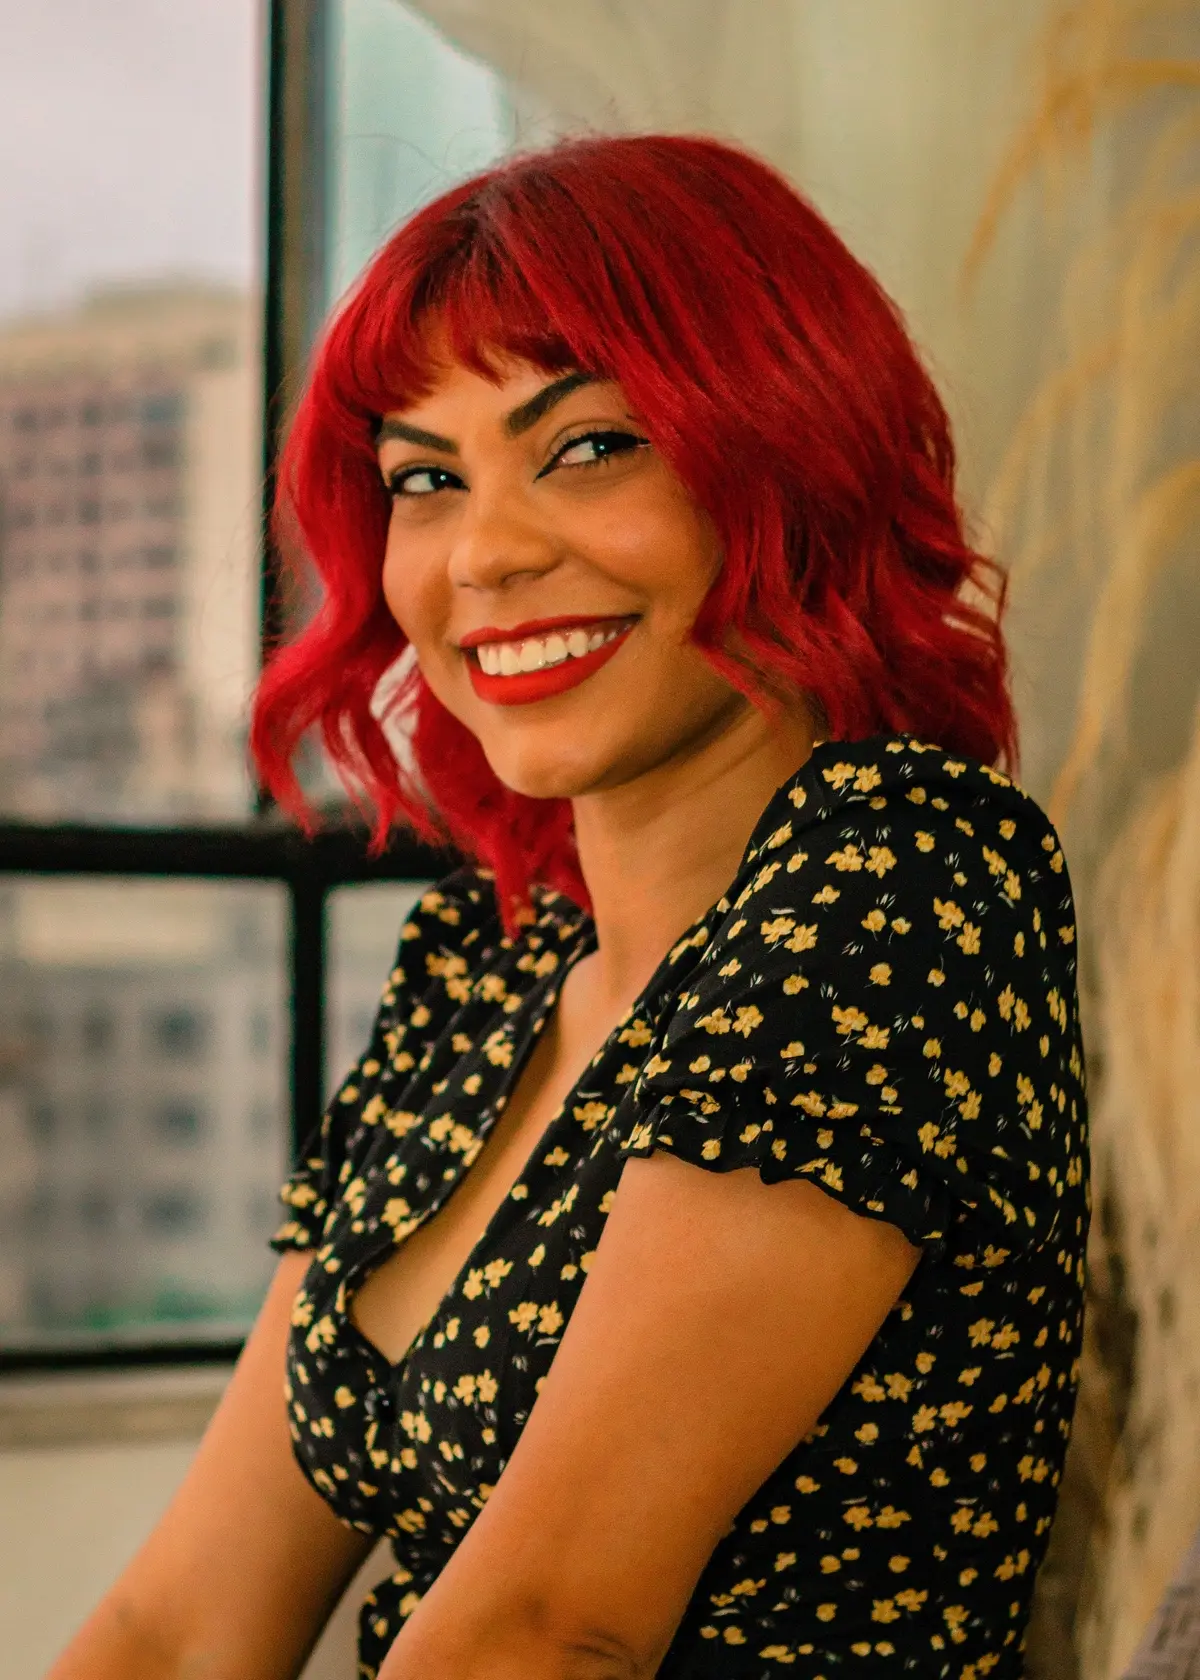 bright cherry red hair on woman with warm olive skin and brown eyes